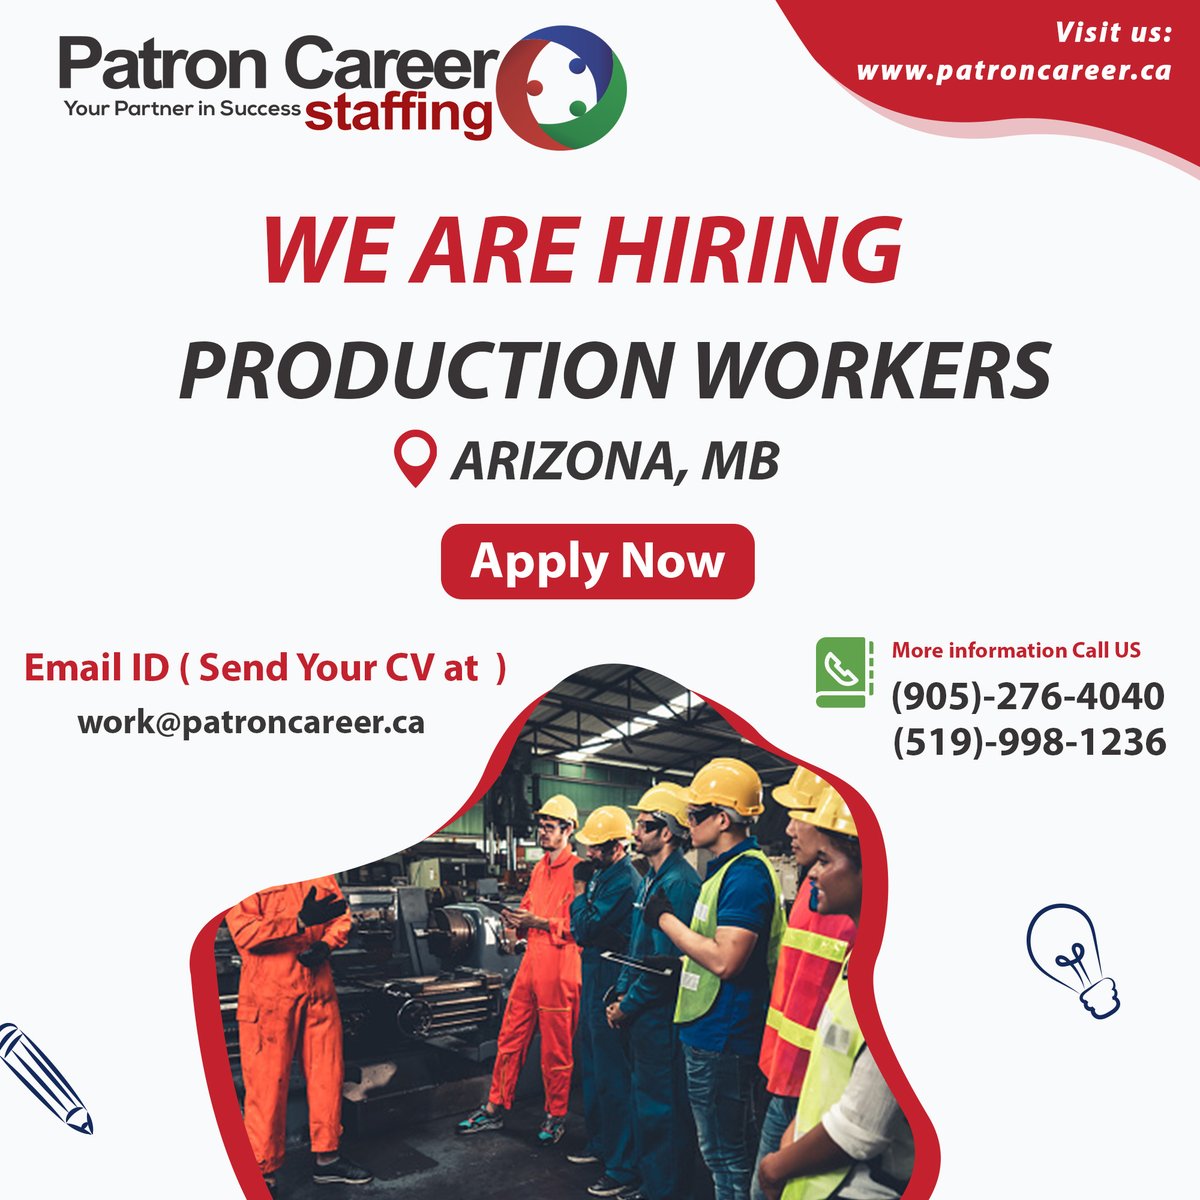 👷We Are Hiring Production Workers

✅Full-Time Job
✅Location: Arizona, MB

Apply Today: patroncareer.ca/Job_Apply_Form…

Call Now:
(905)-276-4040

Email Your CV: work@patroncareer.ca

#wearehiring #canada #productionworkers #arizonamb #productionjobs #jobsearching #jobsincanada